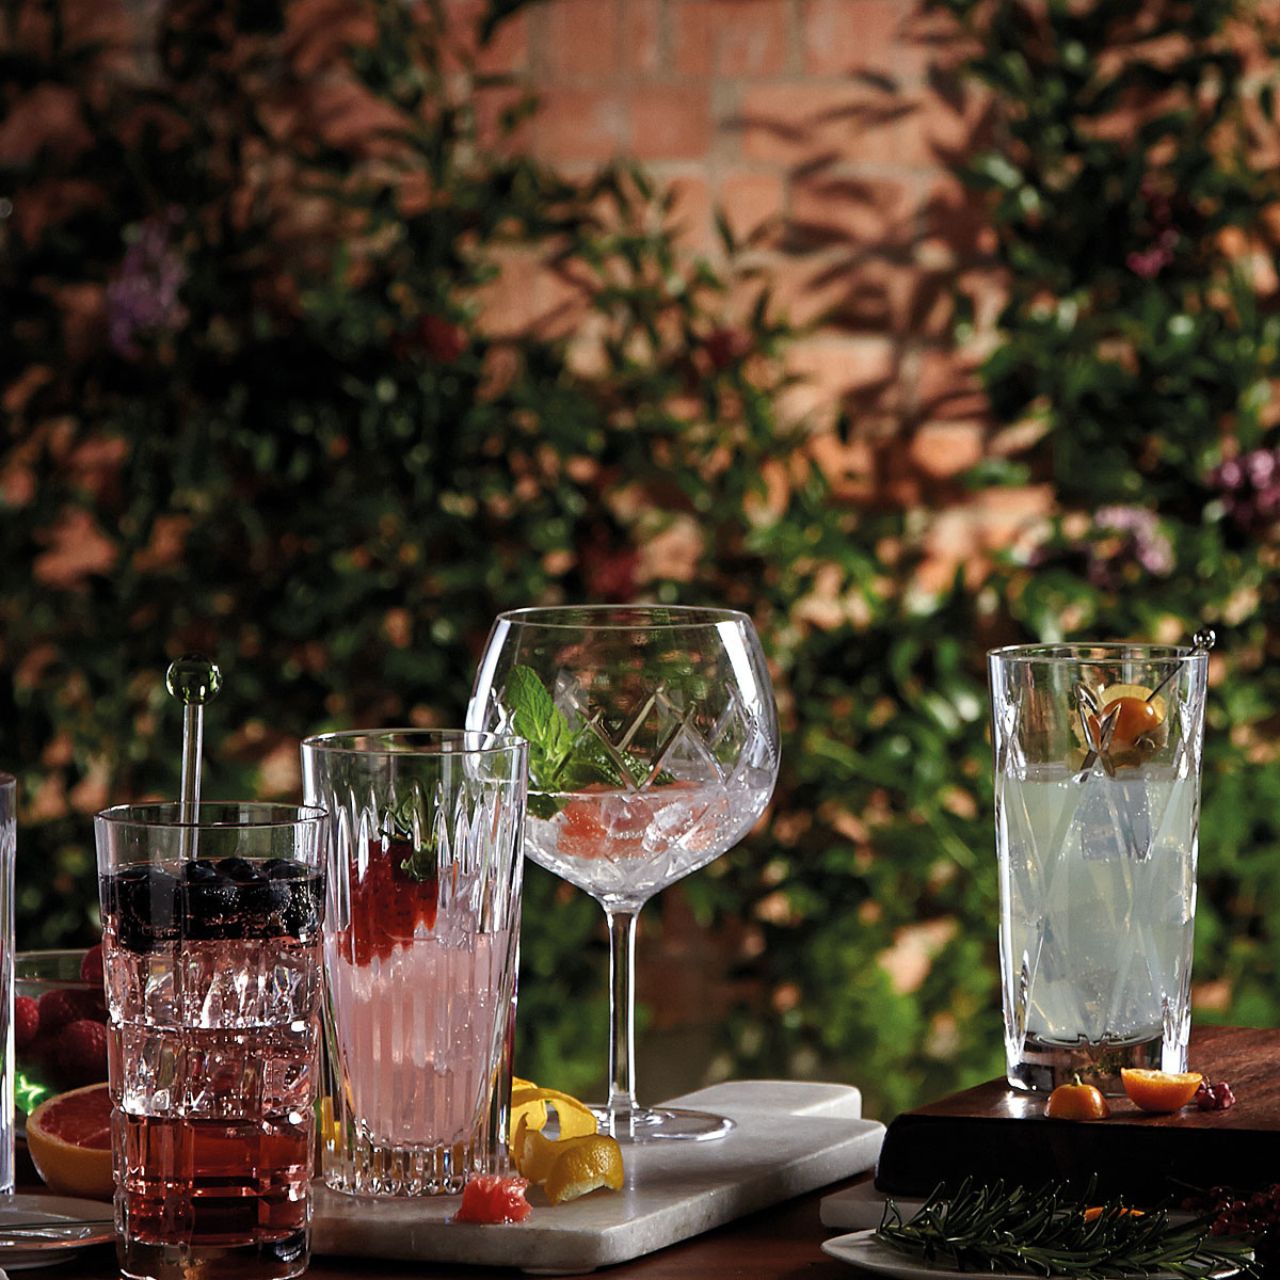 Waterford Crystal Gin Journeys Balloon Wine Glass, Set of 4  Indulge in the optimum gin experience with our striking set of four Gin Journeys Balloon Wine glasses, designed by tasting experts to enrich the aromas and botanical flavours of this iconic summer spirit